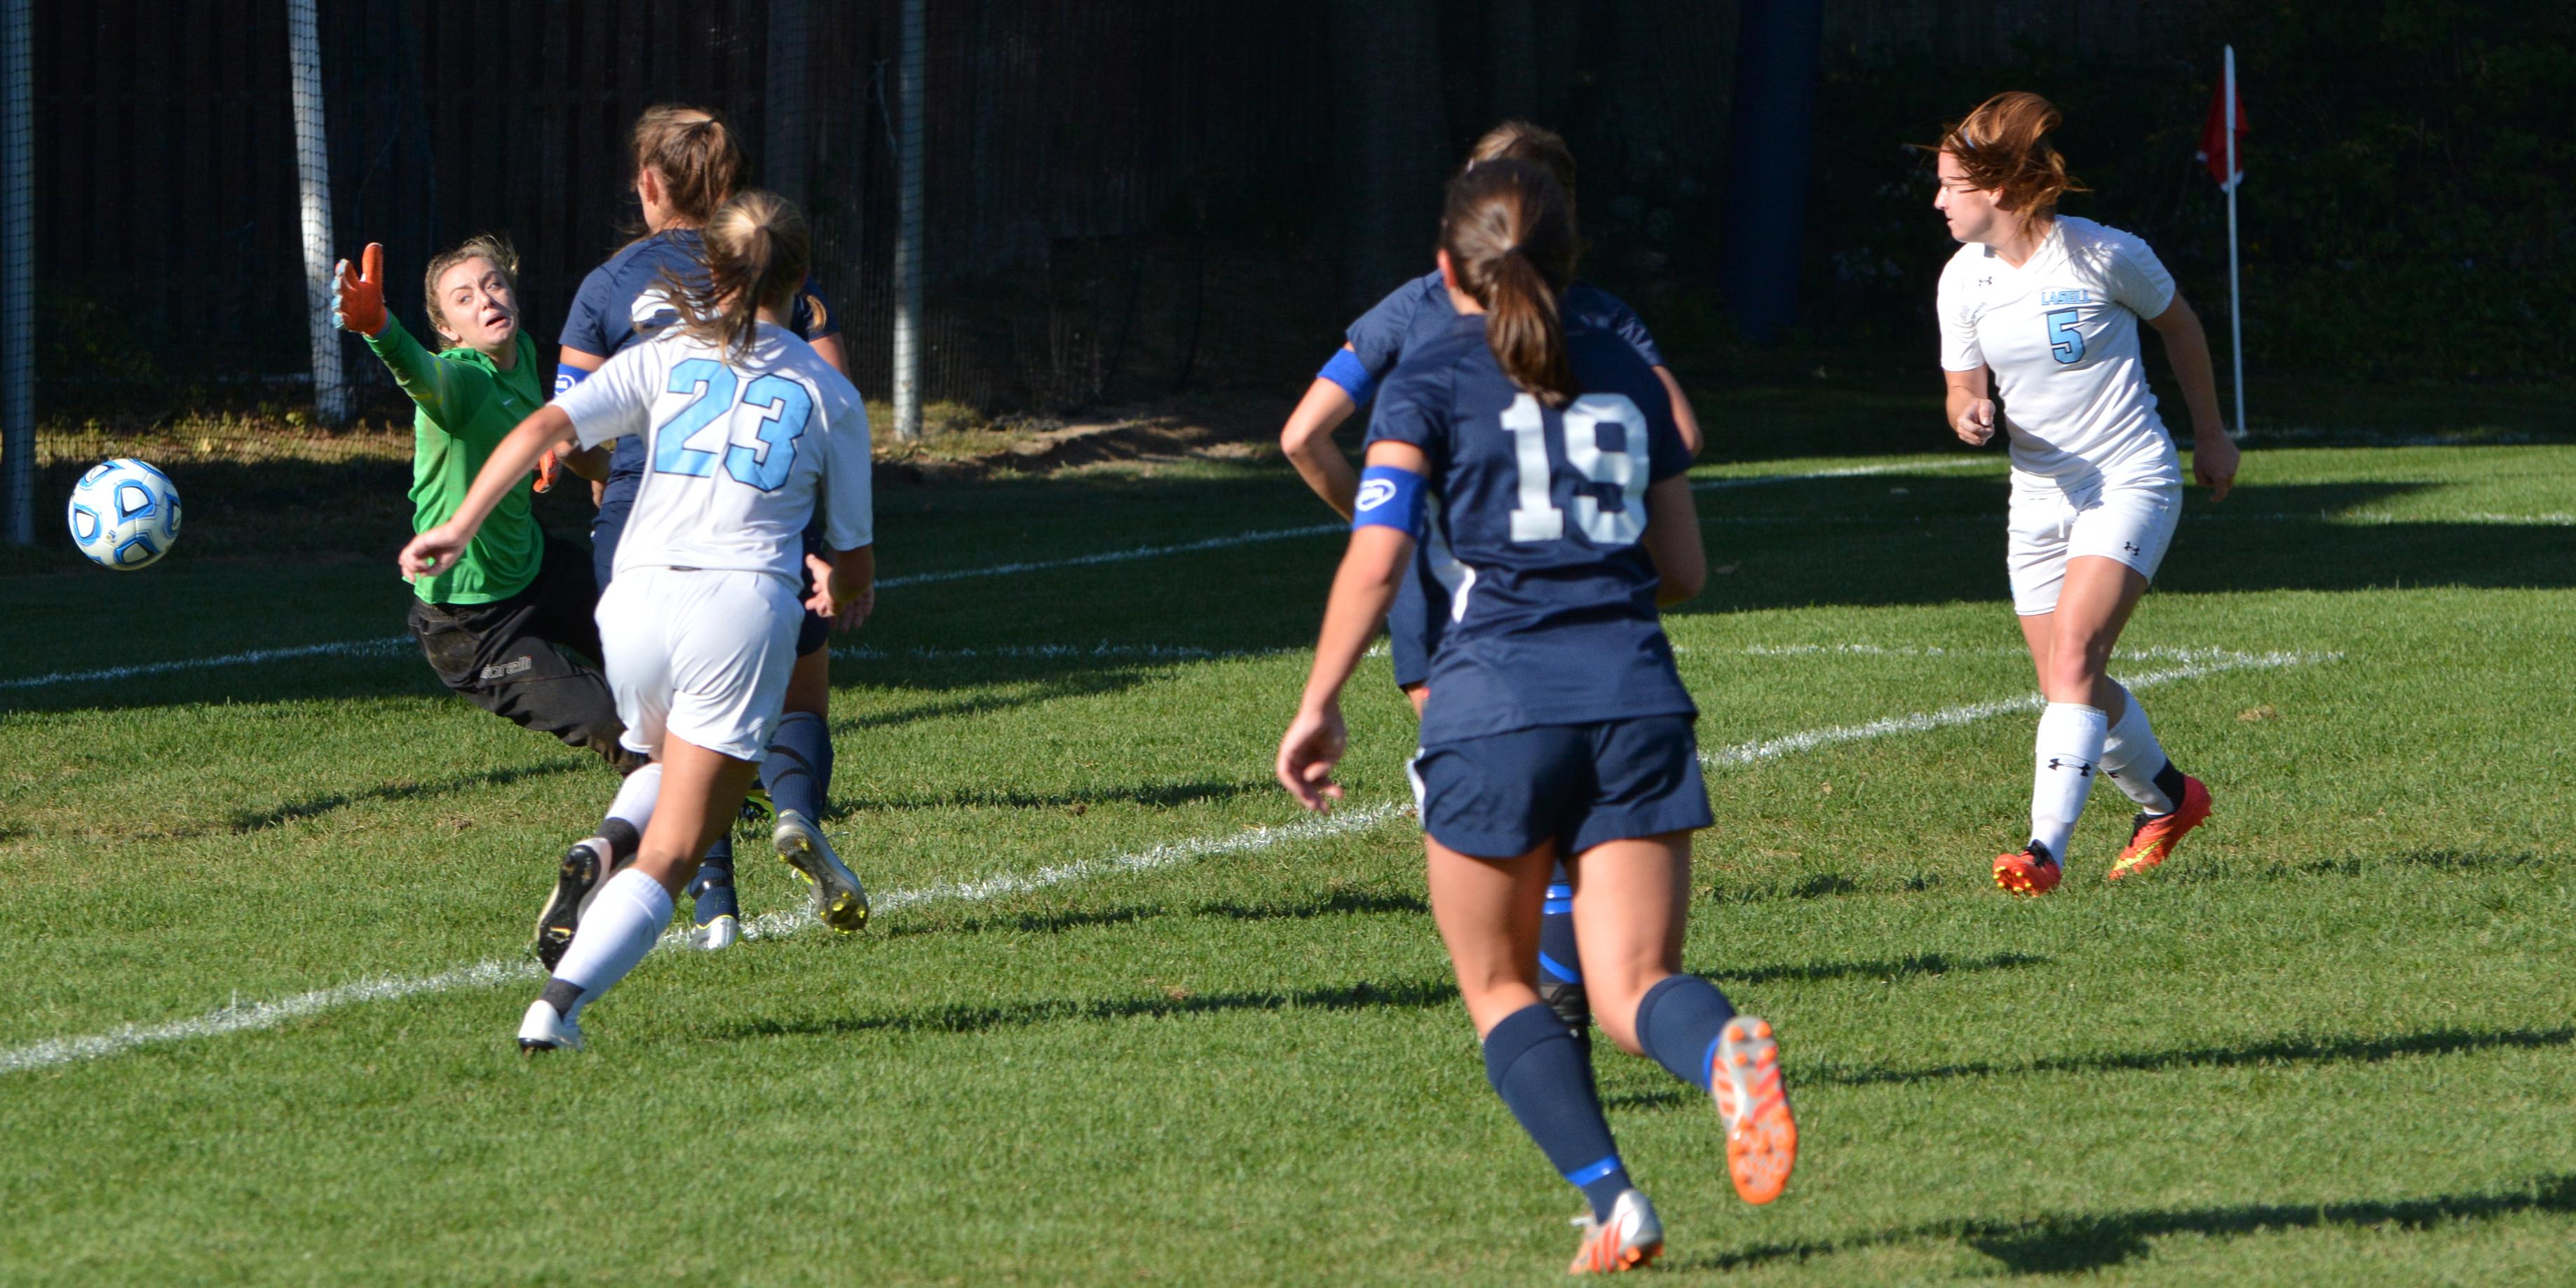 Bridget Lynch Tally Helps Lasell to 1-0 Win Over Albertus Magnus in Women's Soccer